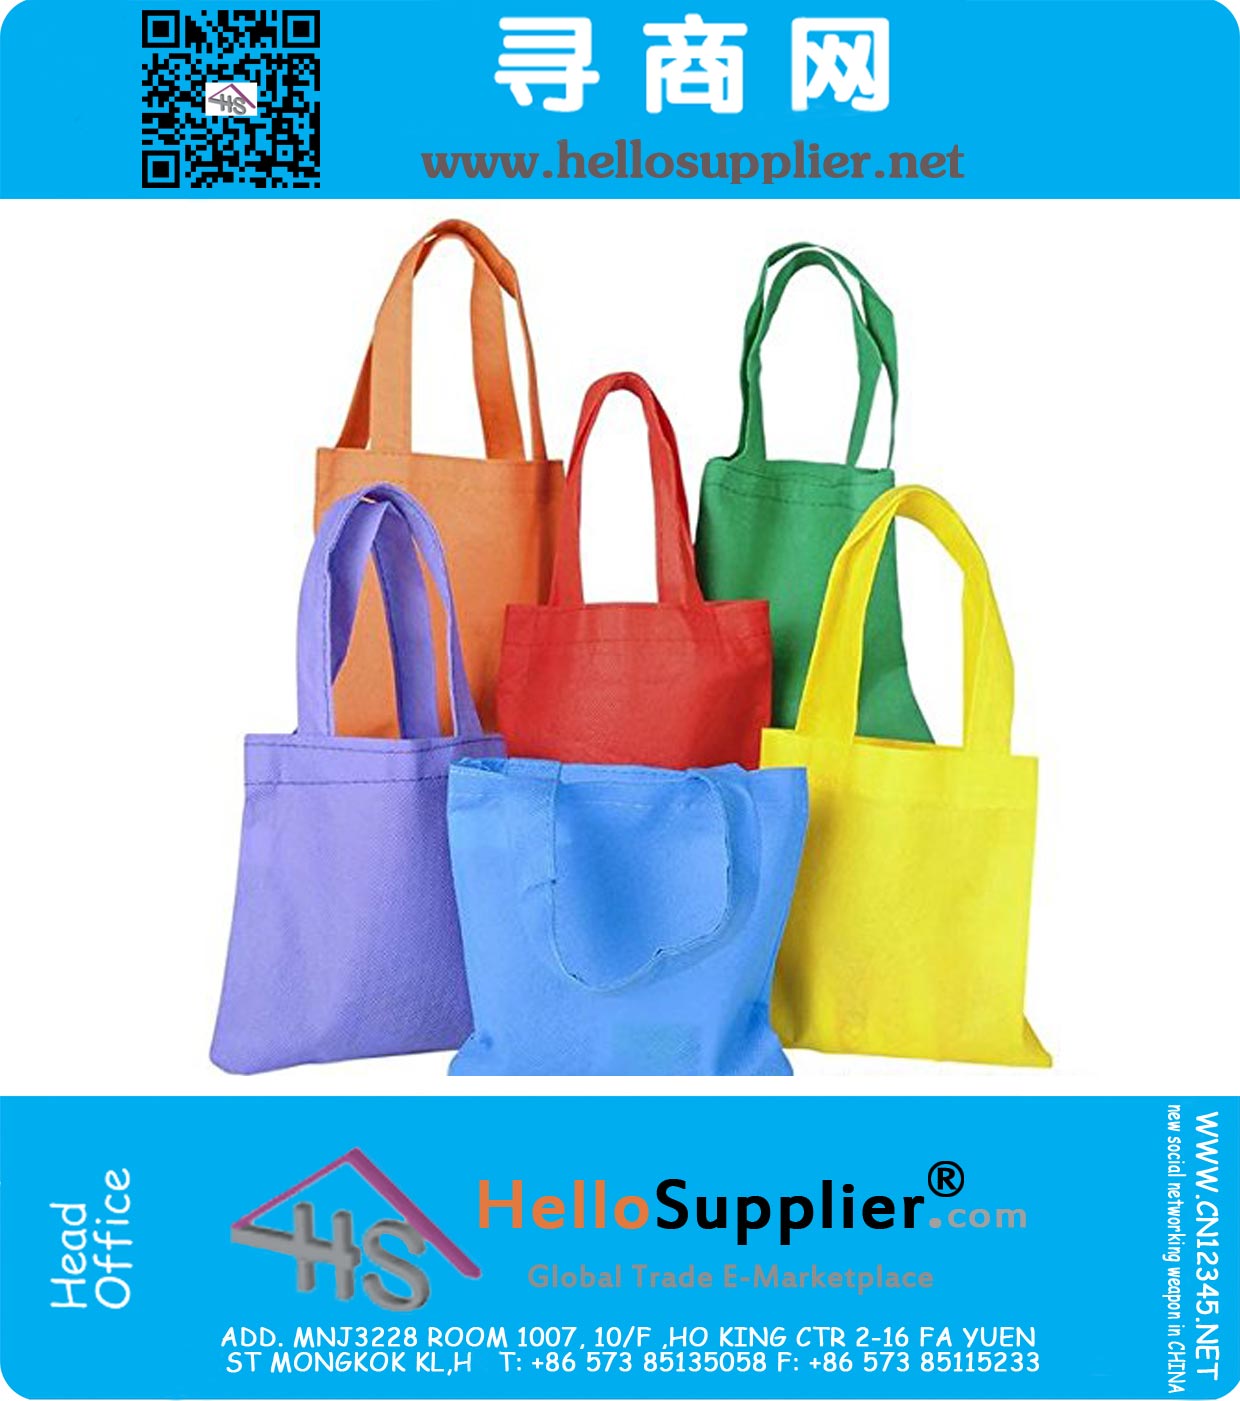 Party Favor Gift Bags Totes- Durable Poly Non-Woven Party Tote Bags - Reusable Treat Bags 6 Inches - 12 Bags in Assorted Colors